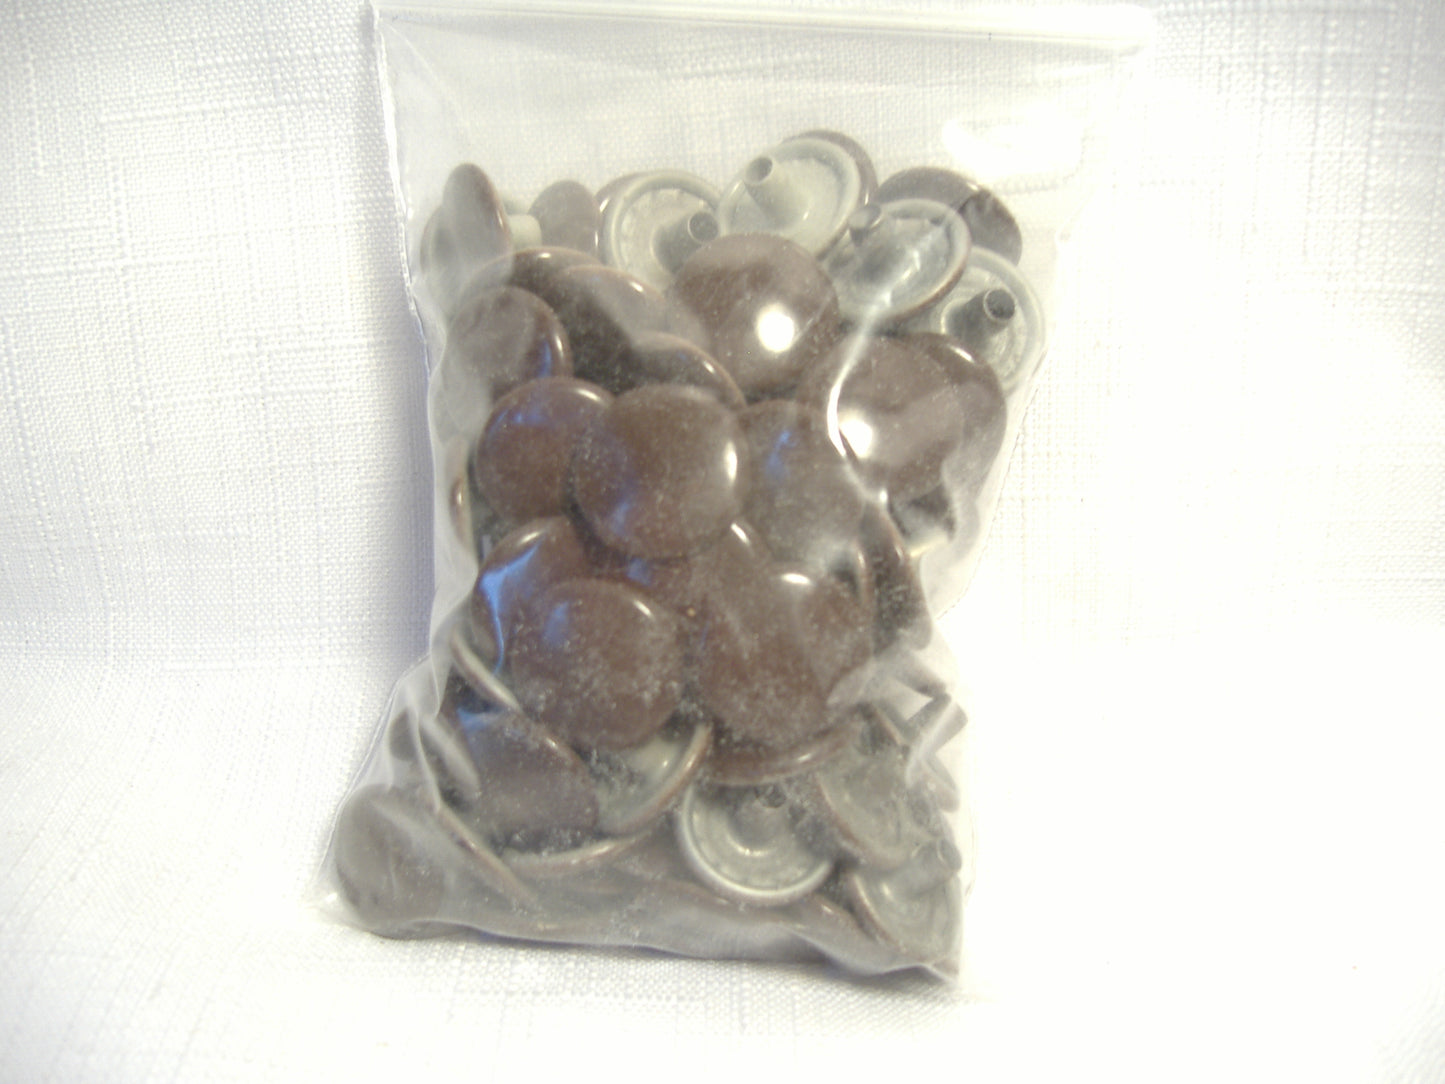 Brown Snap Fastener Buttons Tonneau Cover Qty 100 Pieces OEM NOS California Sidecar